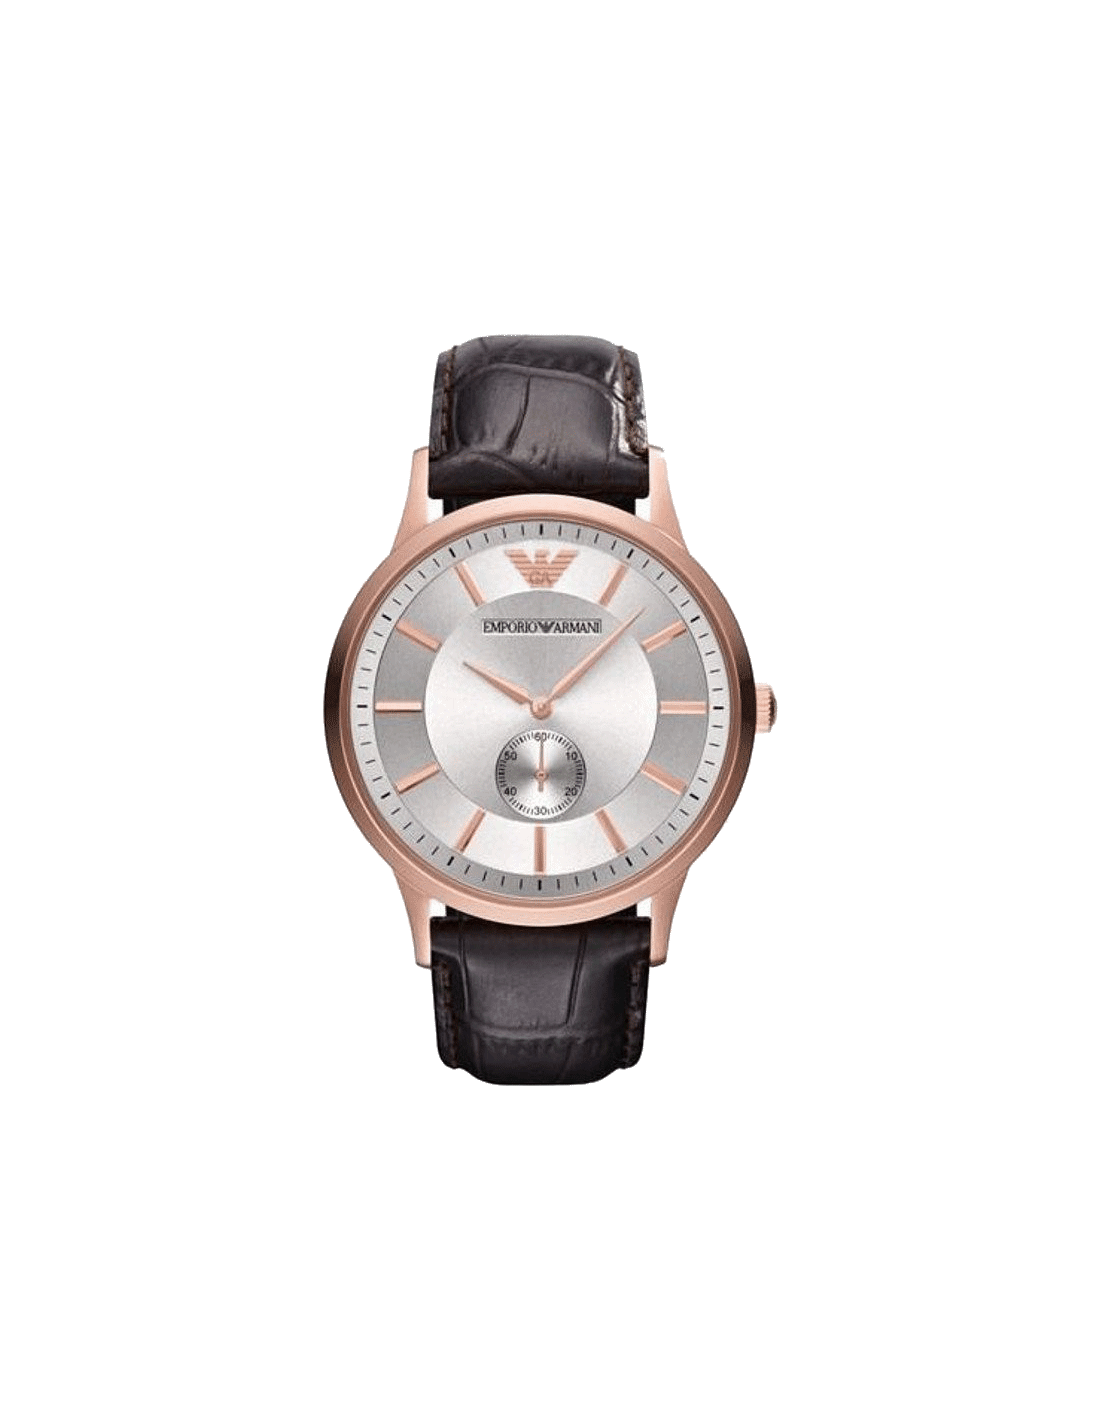 Buy Emporio Armani AR9101 Watch in India I Swiss Time House